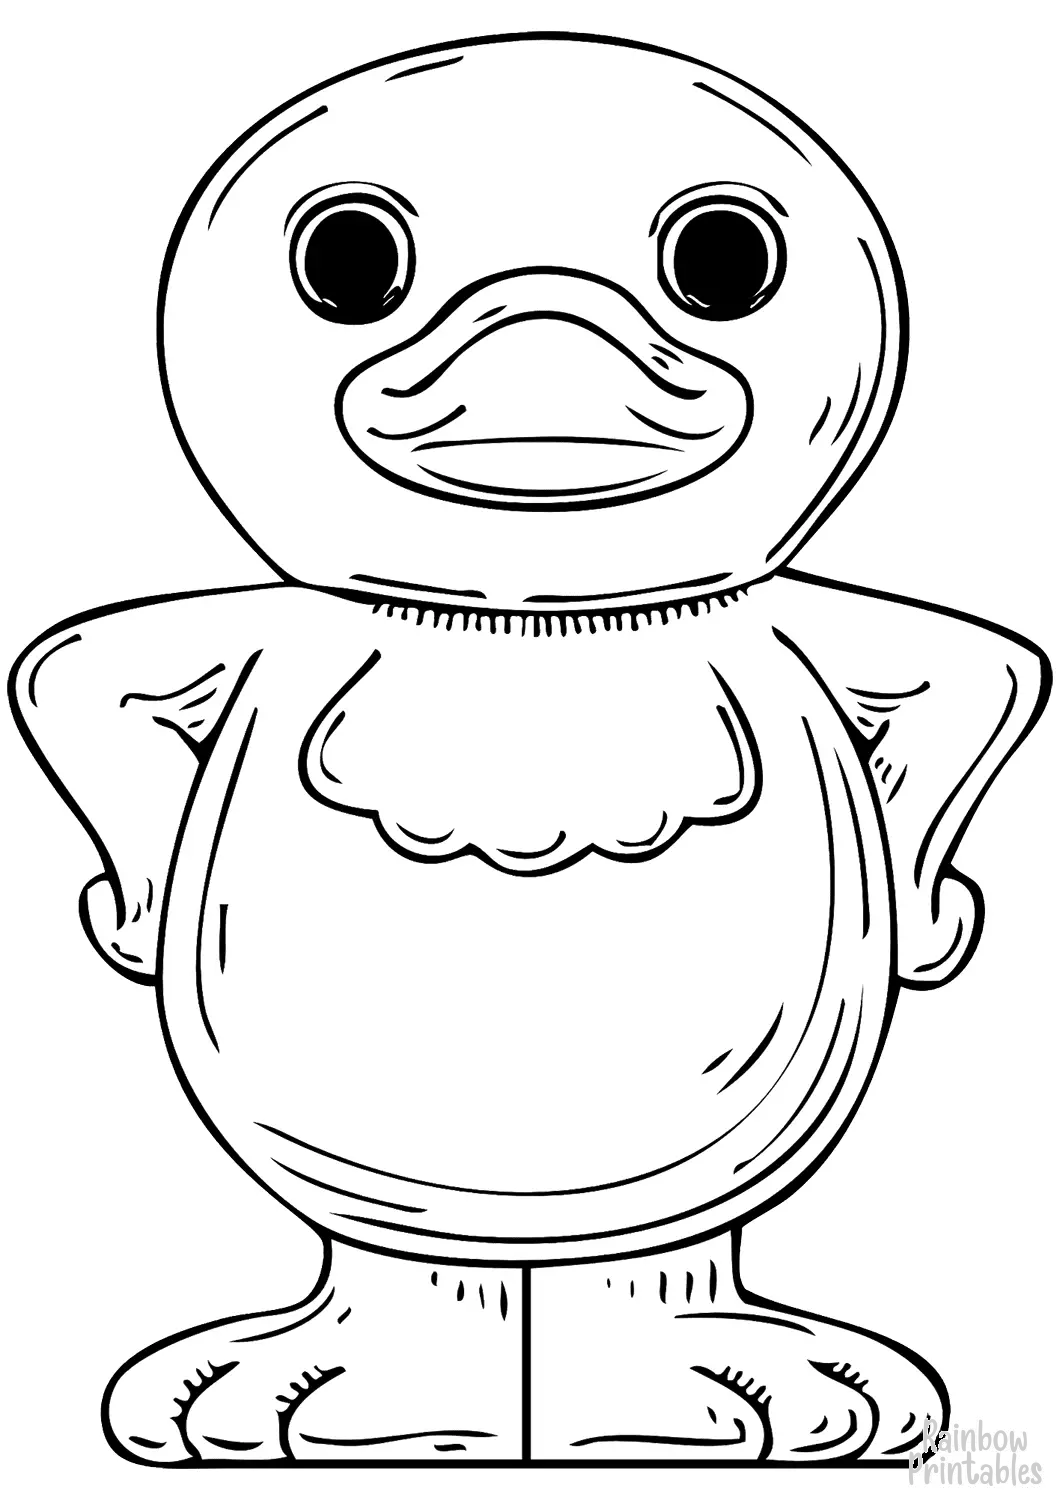 SIMPLE-EASY-line-drawings-DUCKLING-coloring-page-for-kids